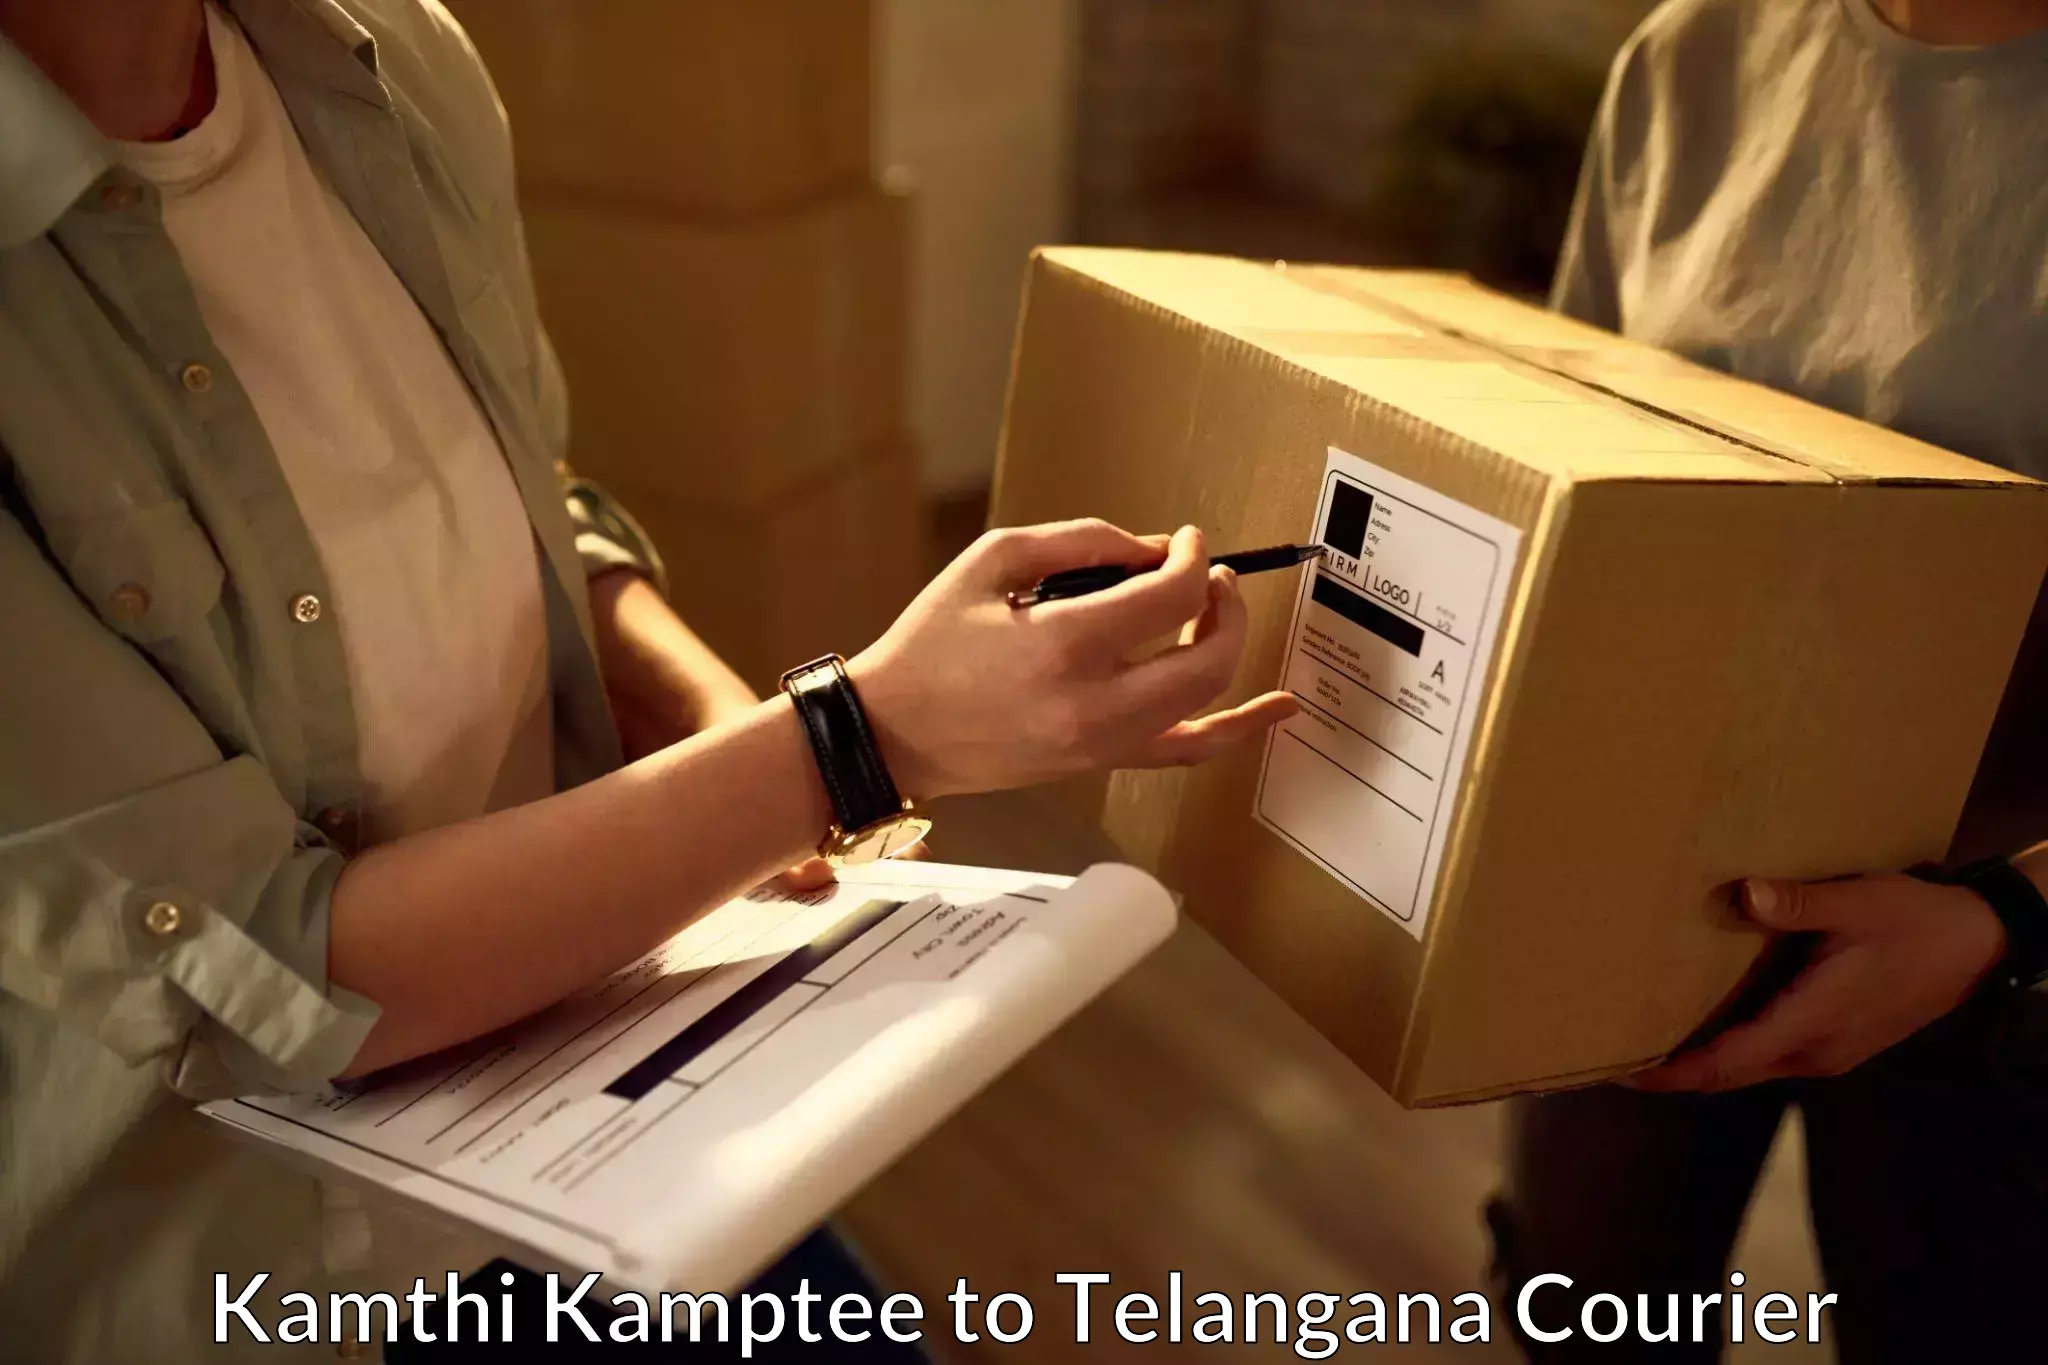 Emergency parcel delivery in Kamthi Kamptee to Narmetta